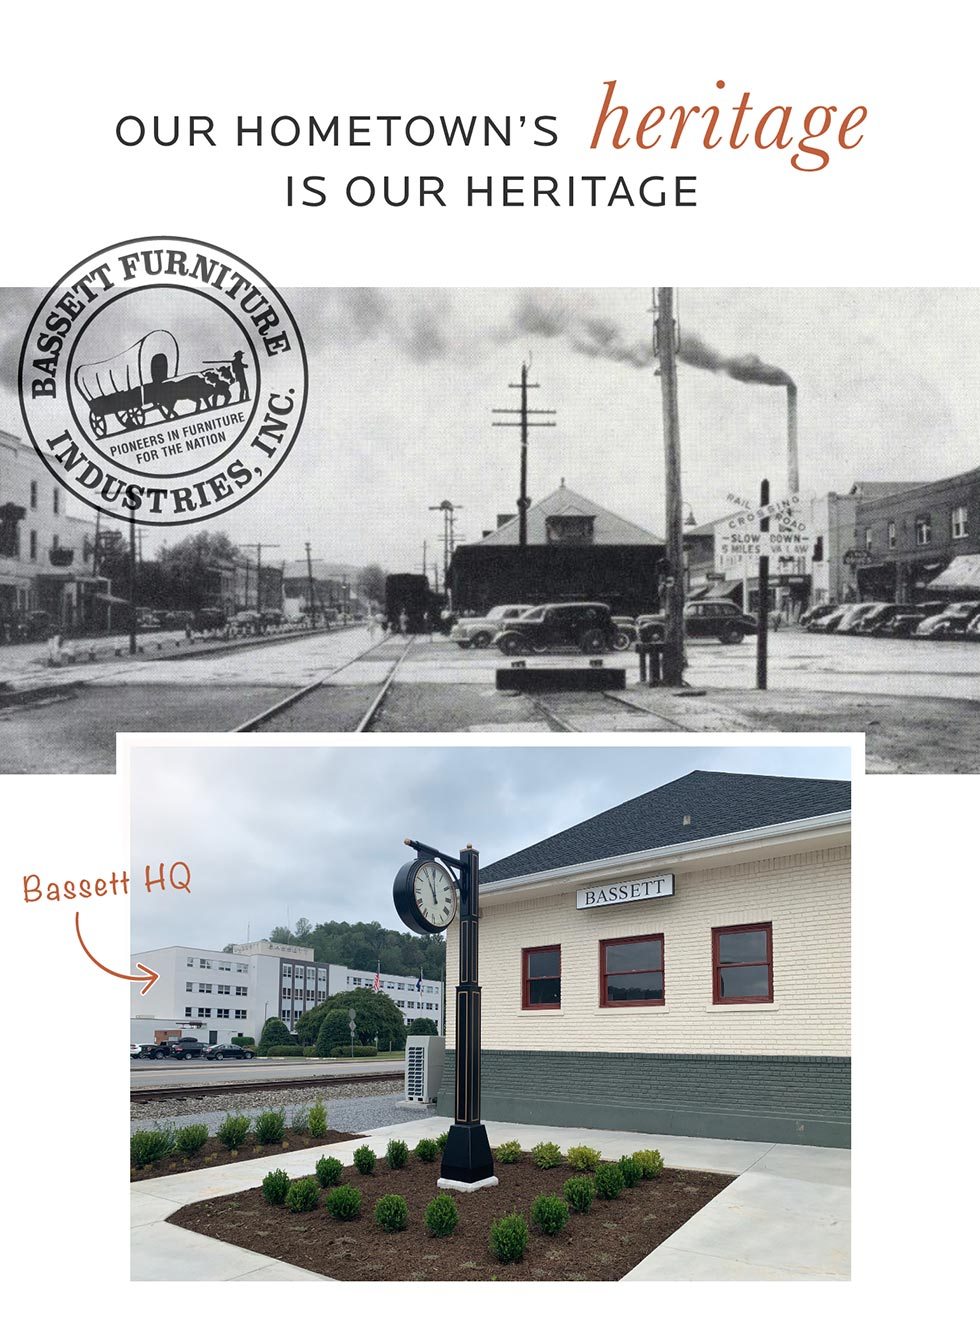 Our hometown's heritage is our heritage. Bassett furniture since 1902.